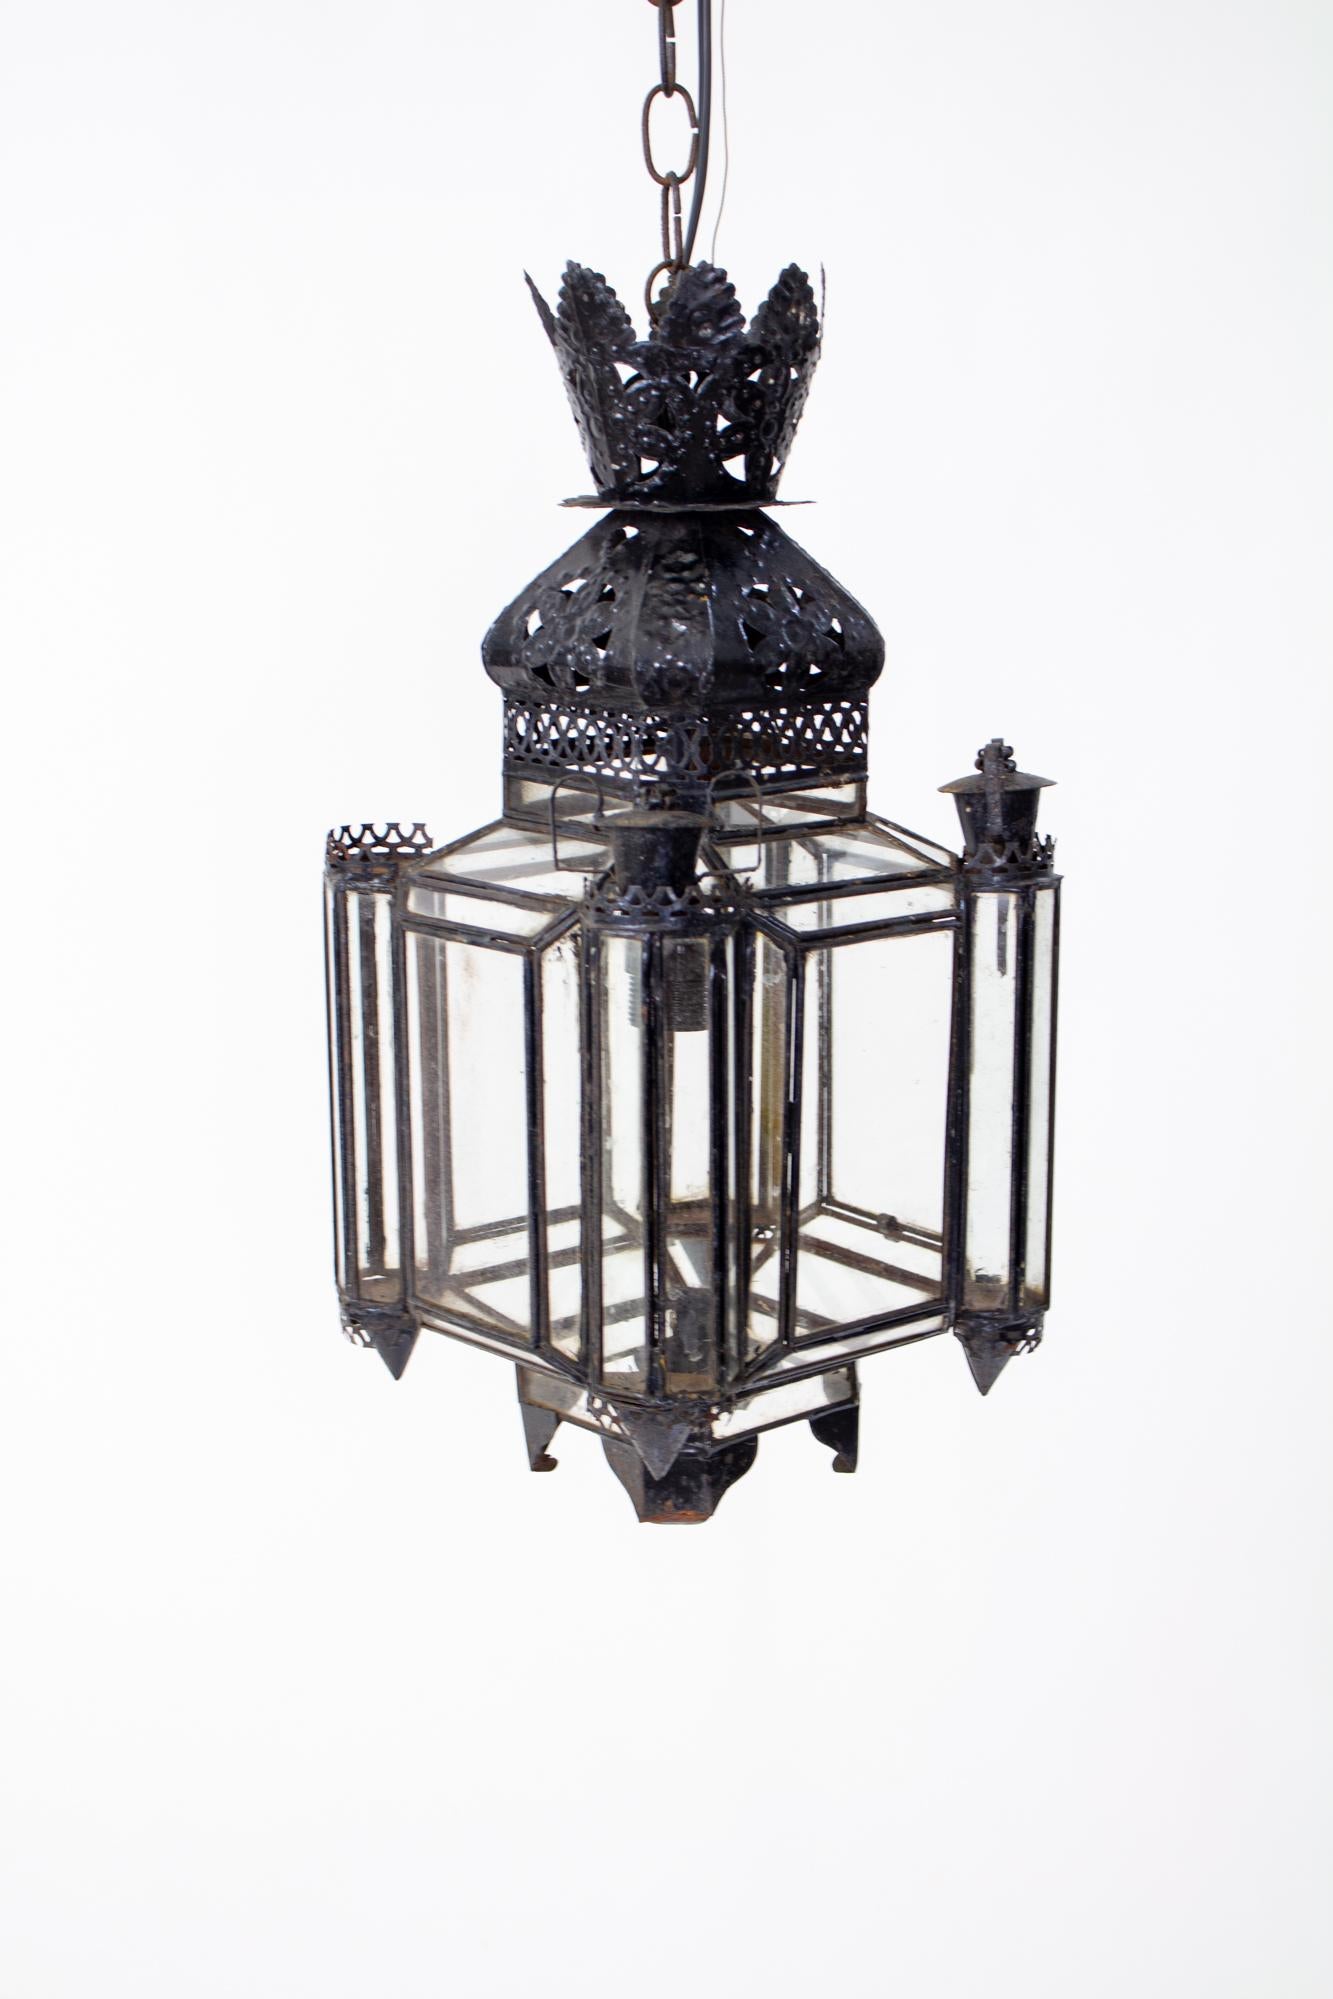 Mid 20th Century Moroccan tin lantern. Four sided with many glass panels. Lantern has been painted black and is aged with some rust. It is in shabby chic condition, rewired with a single bulb. 

Dimensions: 

Width: 9”
Depth:9”
Height: 24” overall,